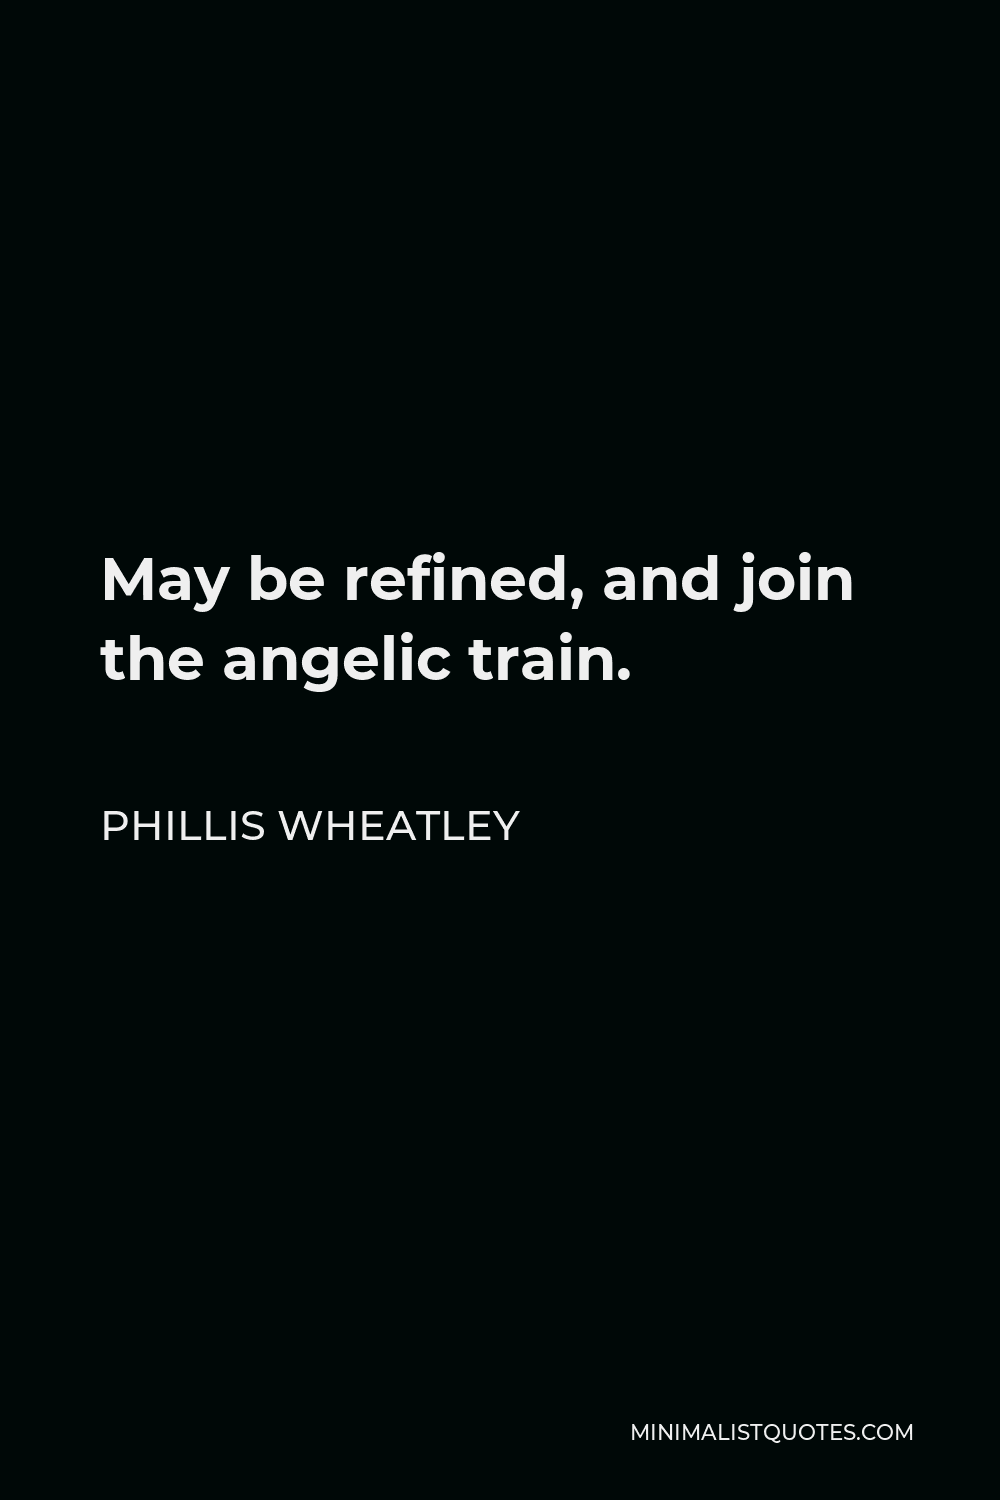 Phillis Wheatley Quote - May be refined, and join the angelic train.